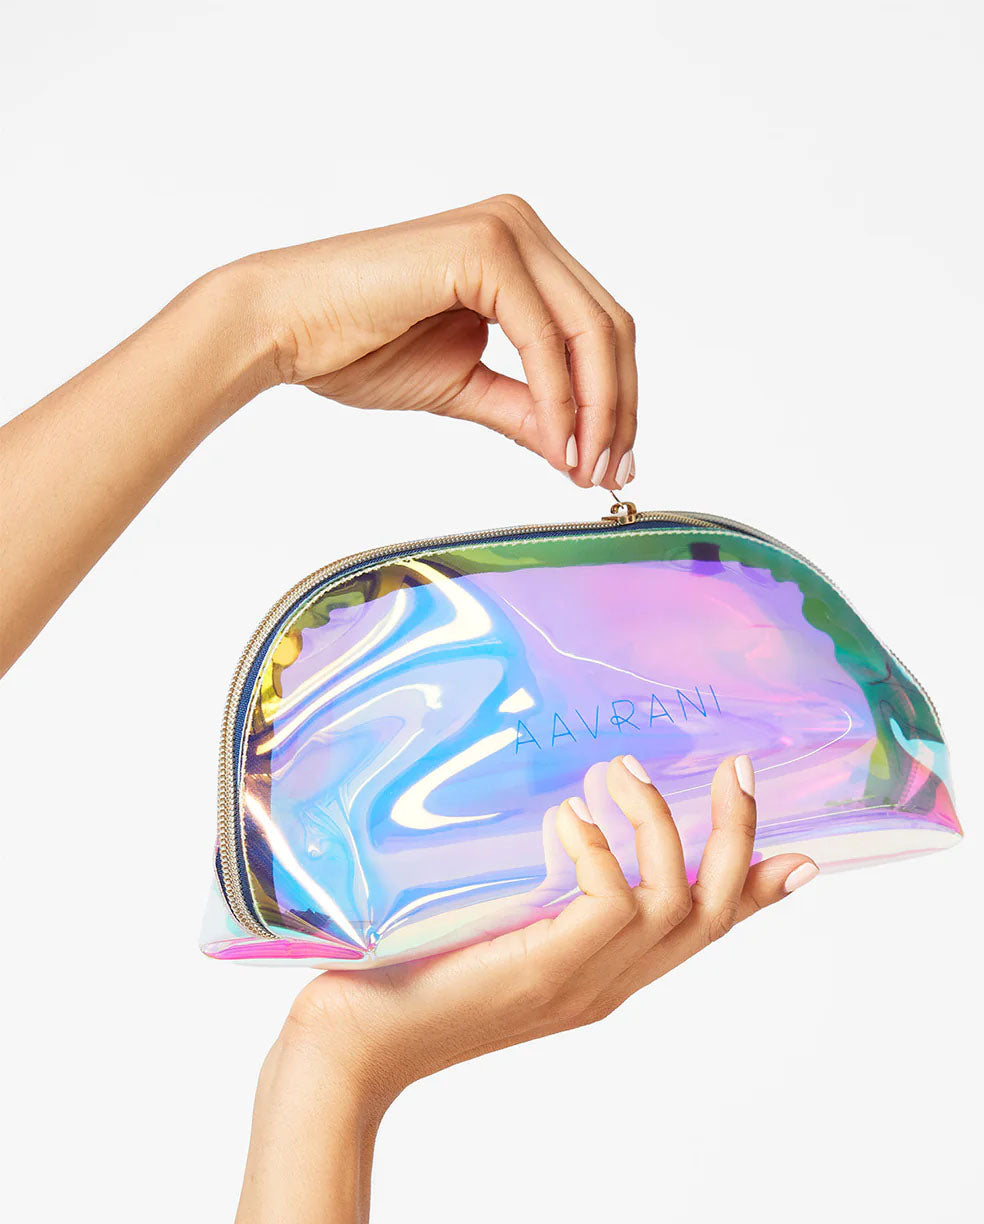 AAVRANI Holographic Bag being held by a model unzipping bag